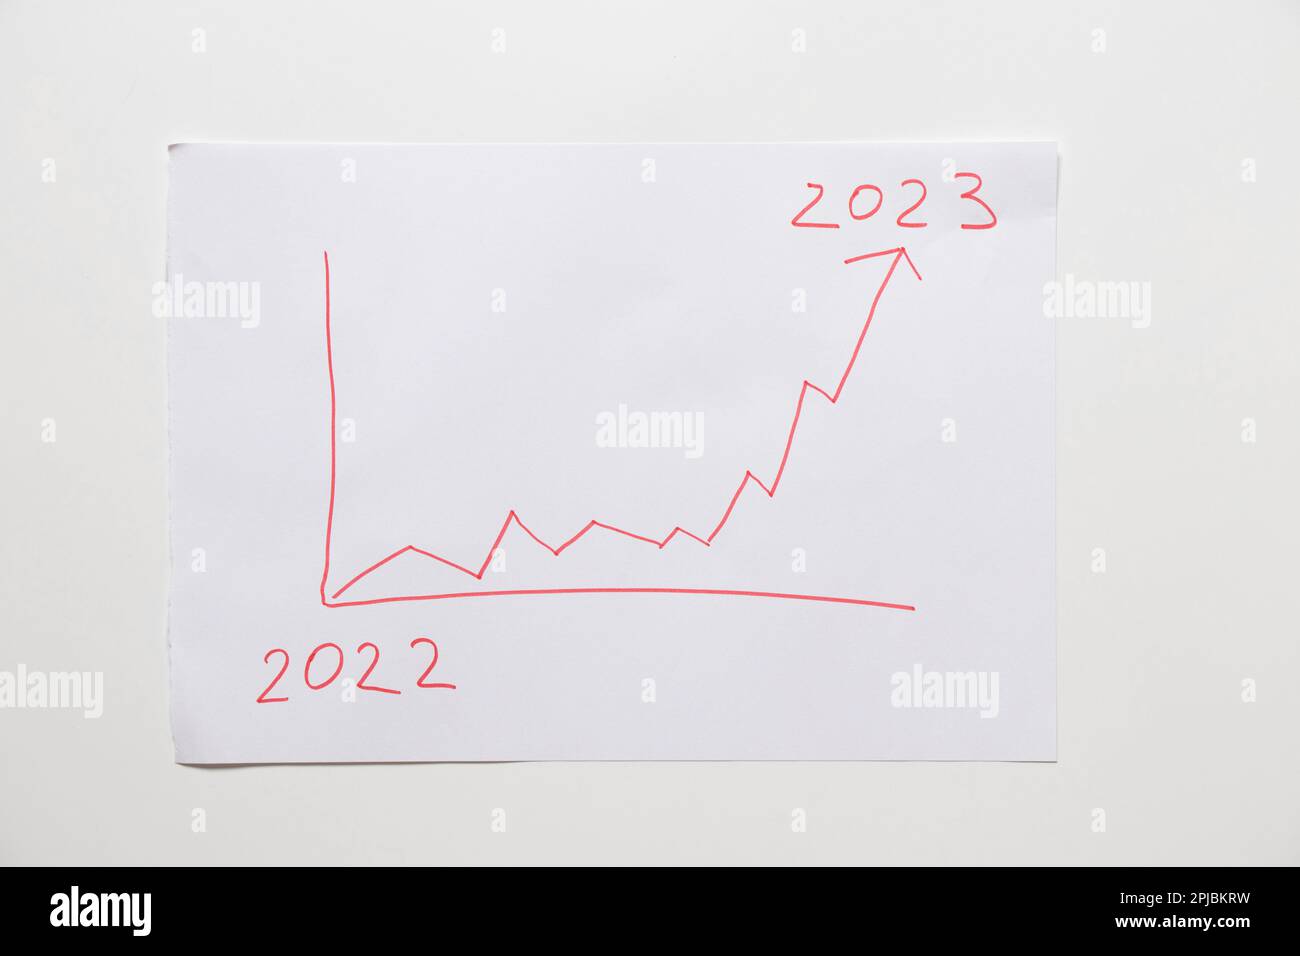 Drawn histogram arrow growing up from the year 2022 to the year 2023 on paper, analytics Stock Photo